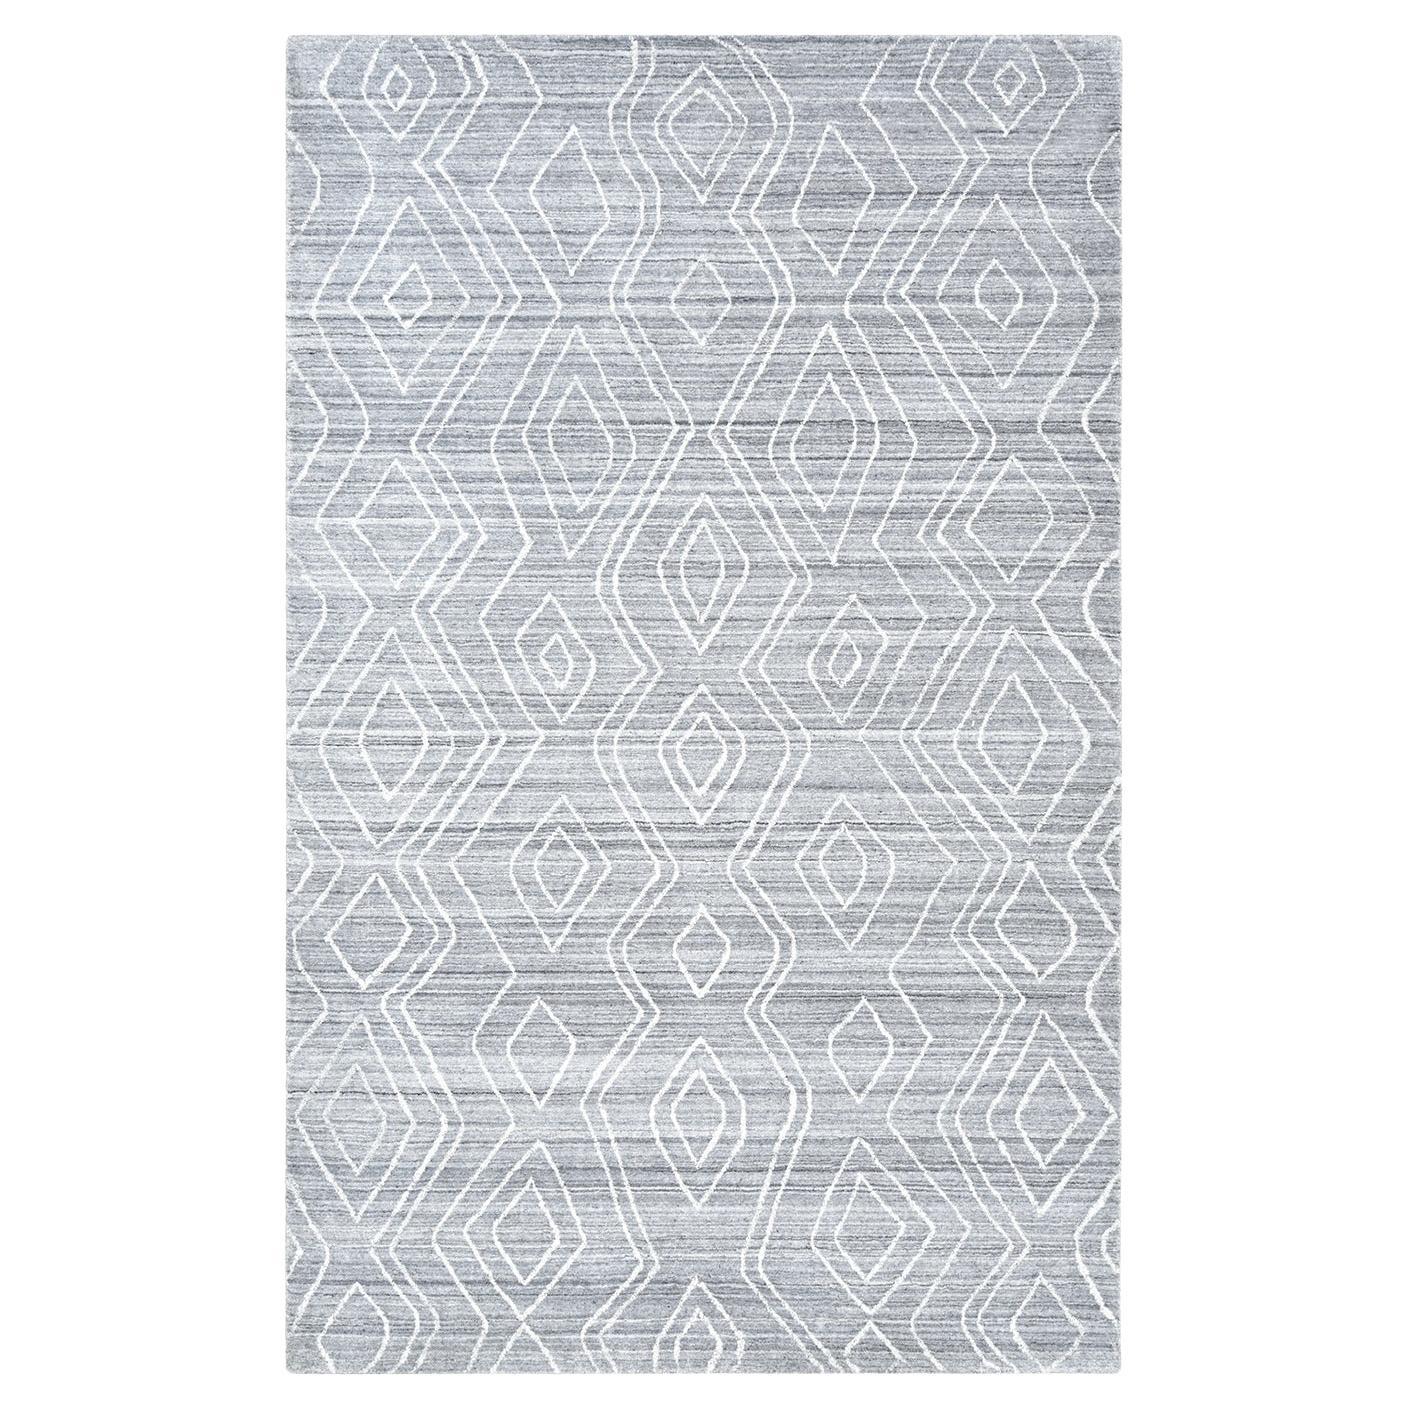 Solo Rugs Moroccan Geometric Hand Loomed Light Grey Area Rug For Sale